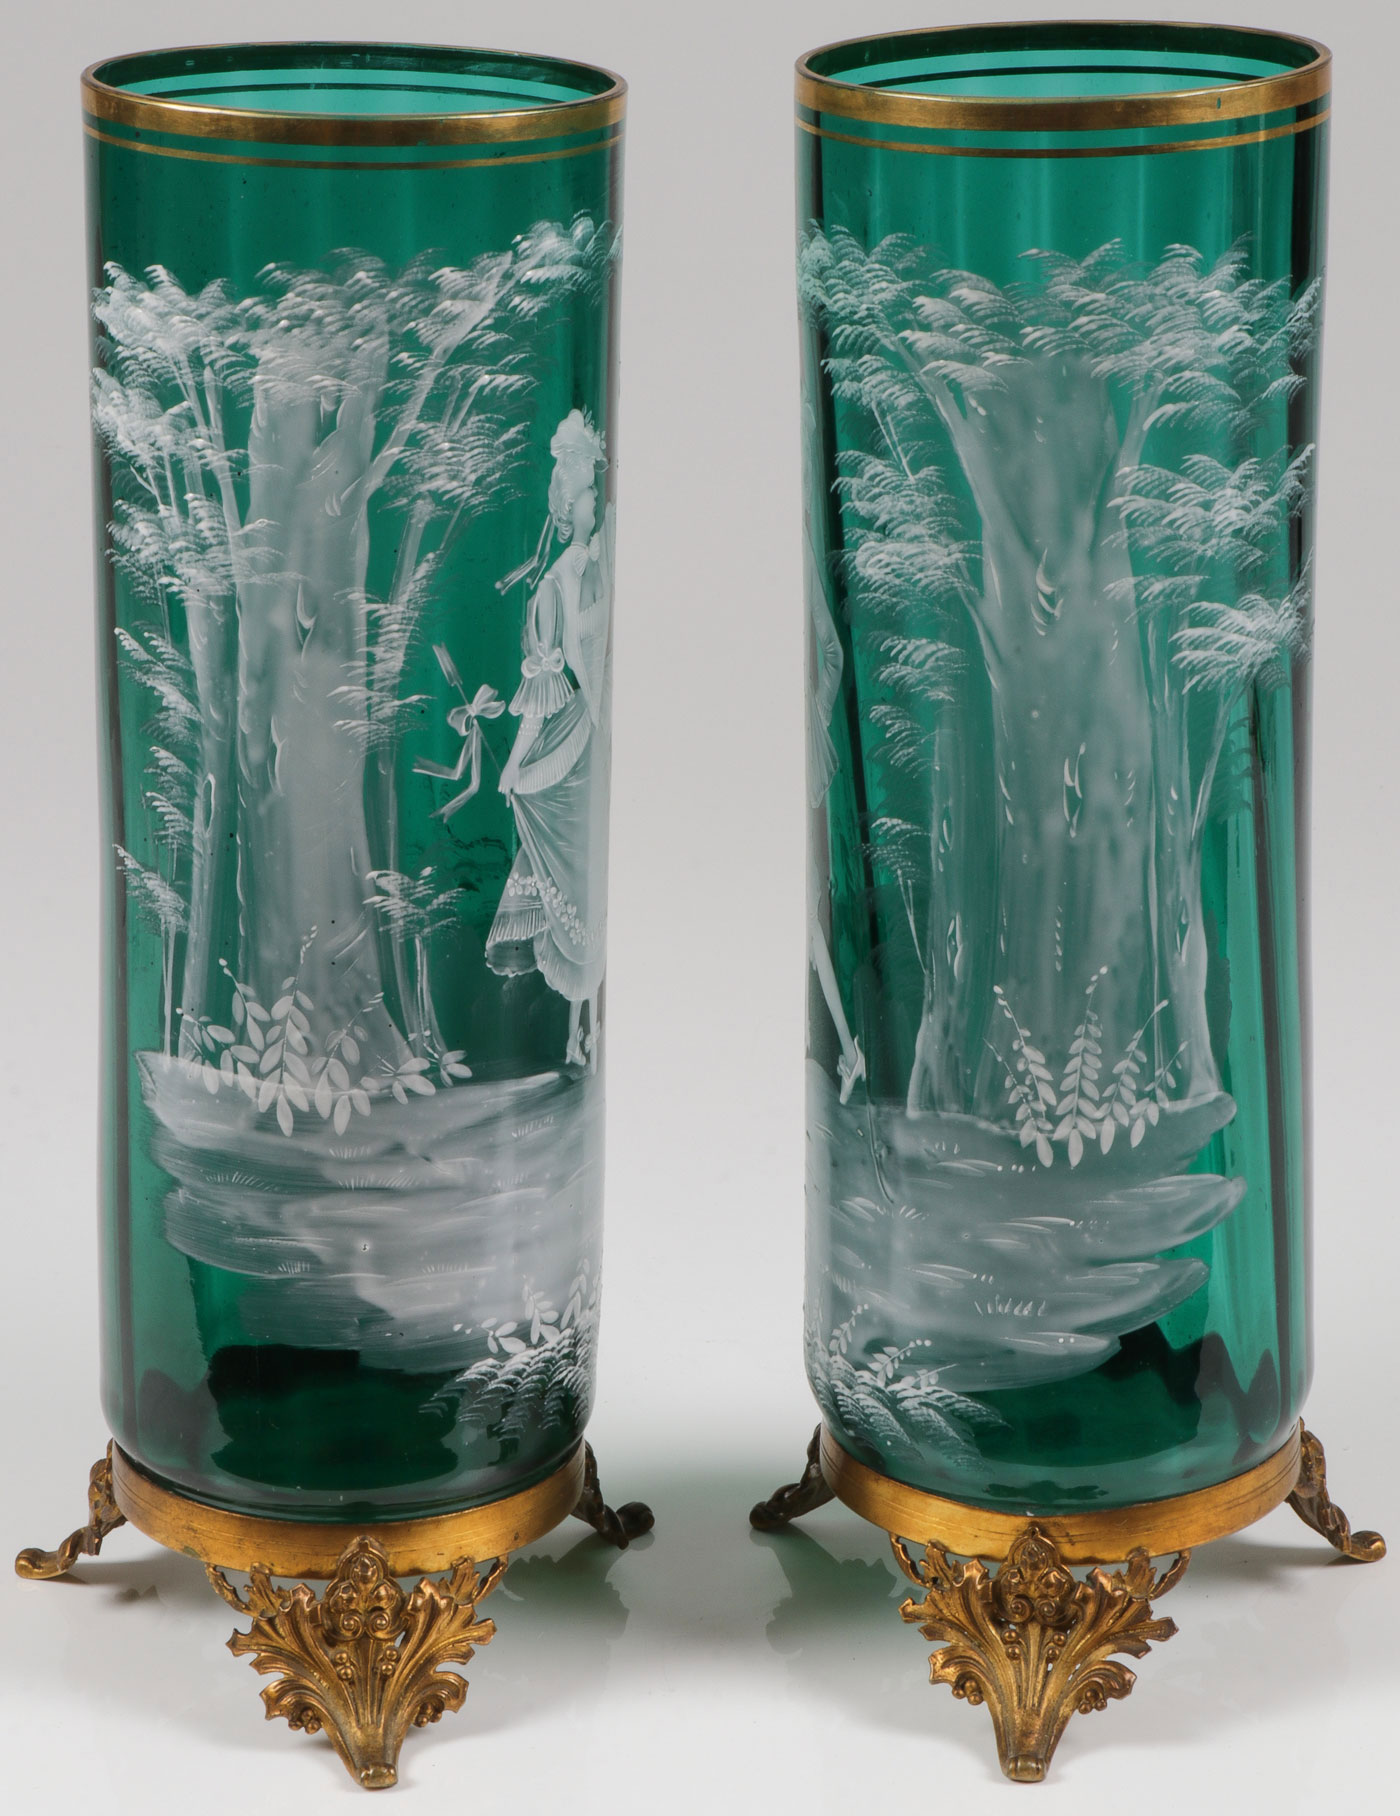 PAIR LARGE MARY GREGORY EMERALD MANTEL VASES - Image 2 of 2